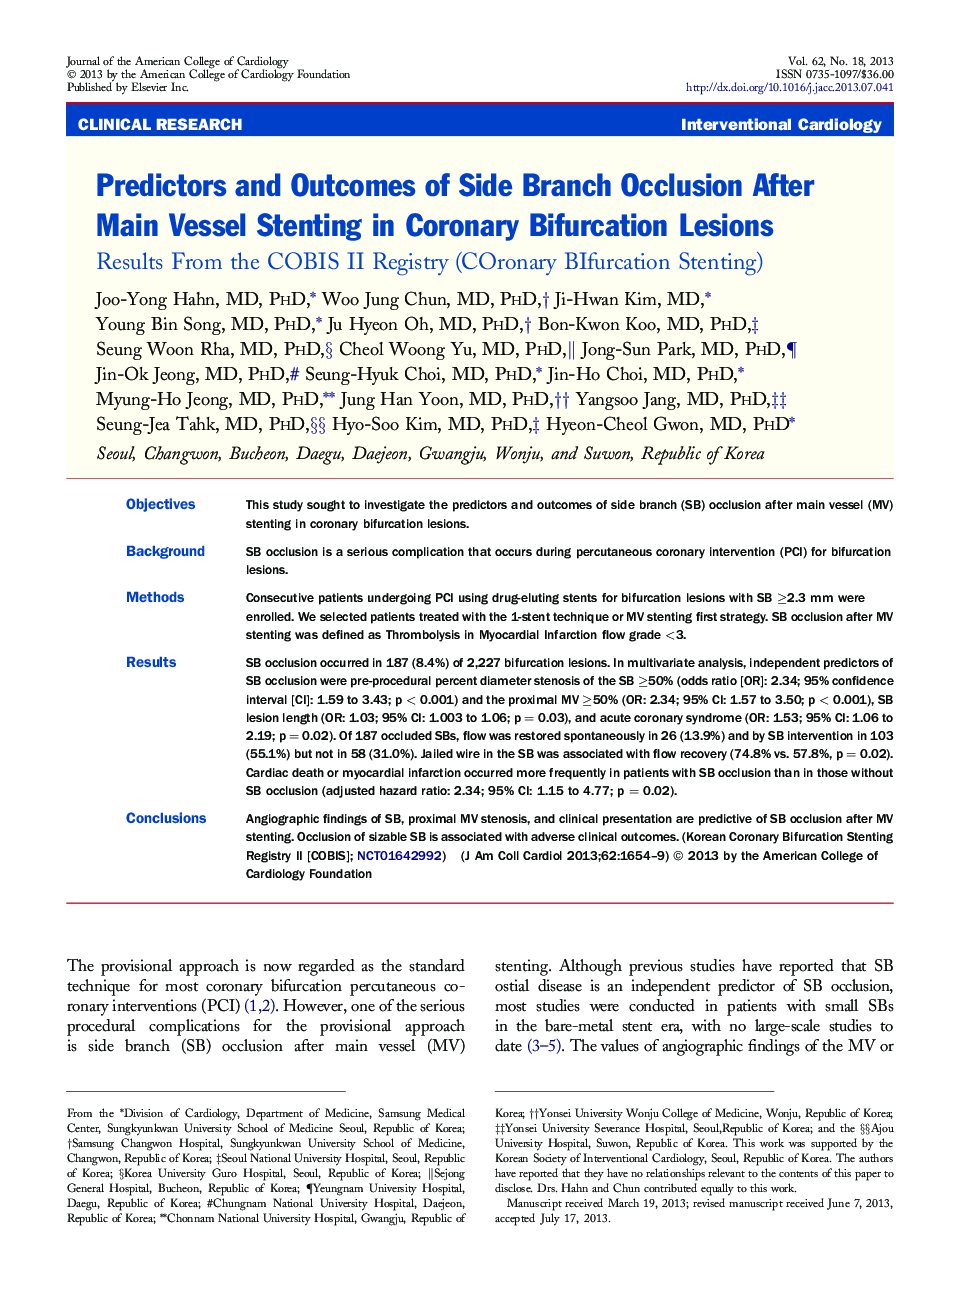 Predictors and Outcomes of Side Branch Occlusion After Main Vessel Stenting in Coronary Bifurcation Lesions: Results From the COBIS II Registry (COronary BIfurcation Stenting)